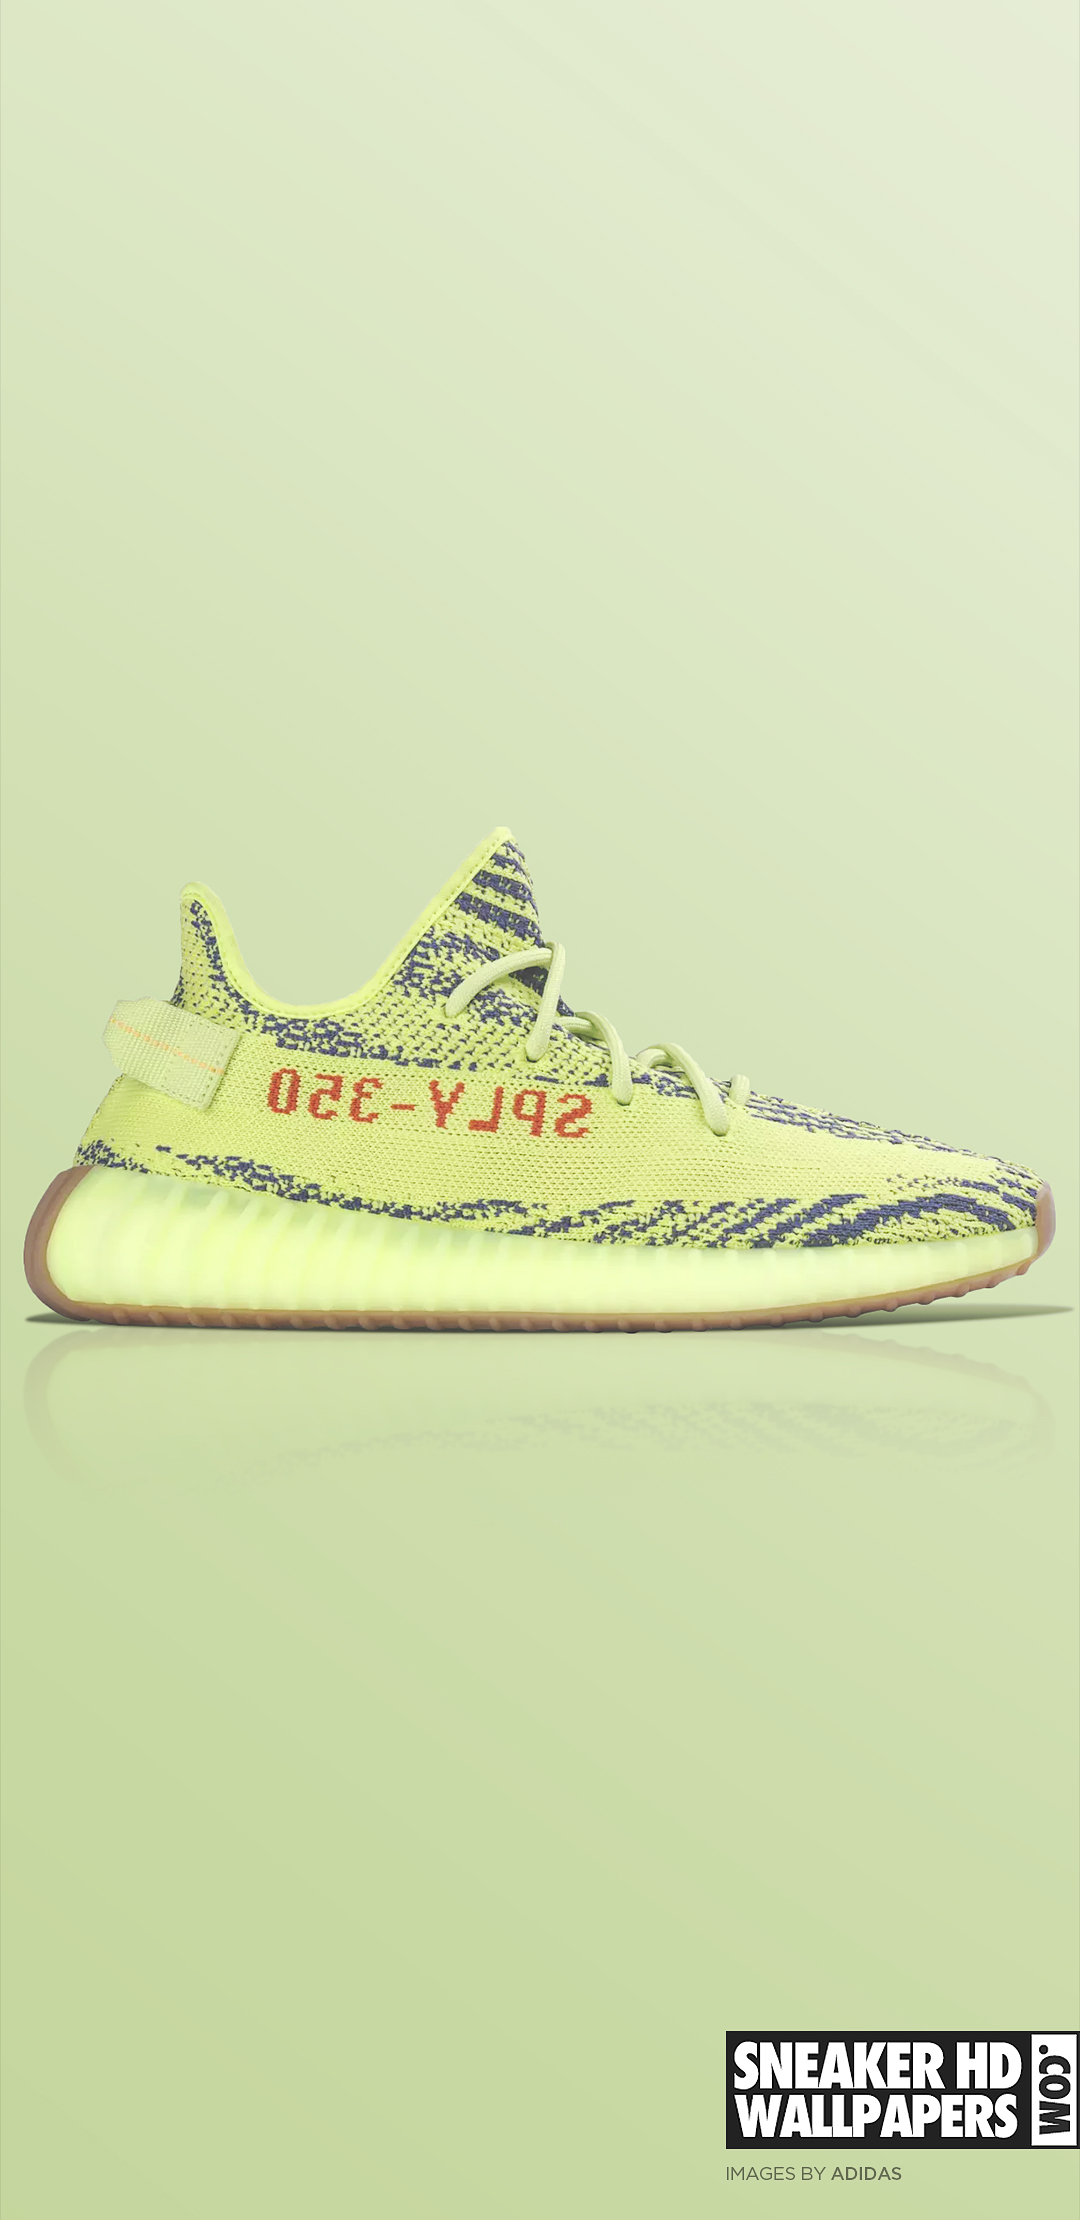 Yeezy Shoes Wallpapers